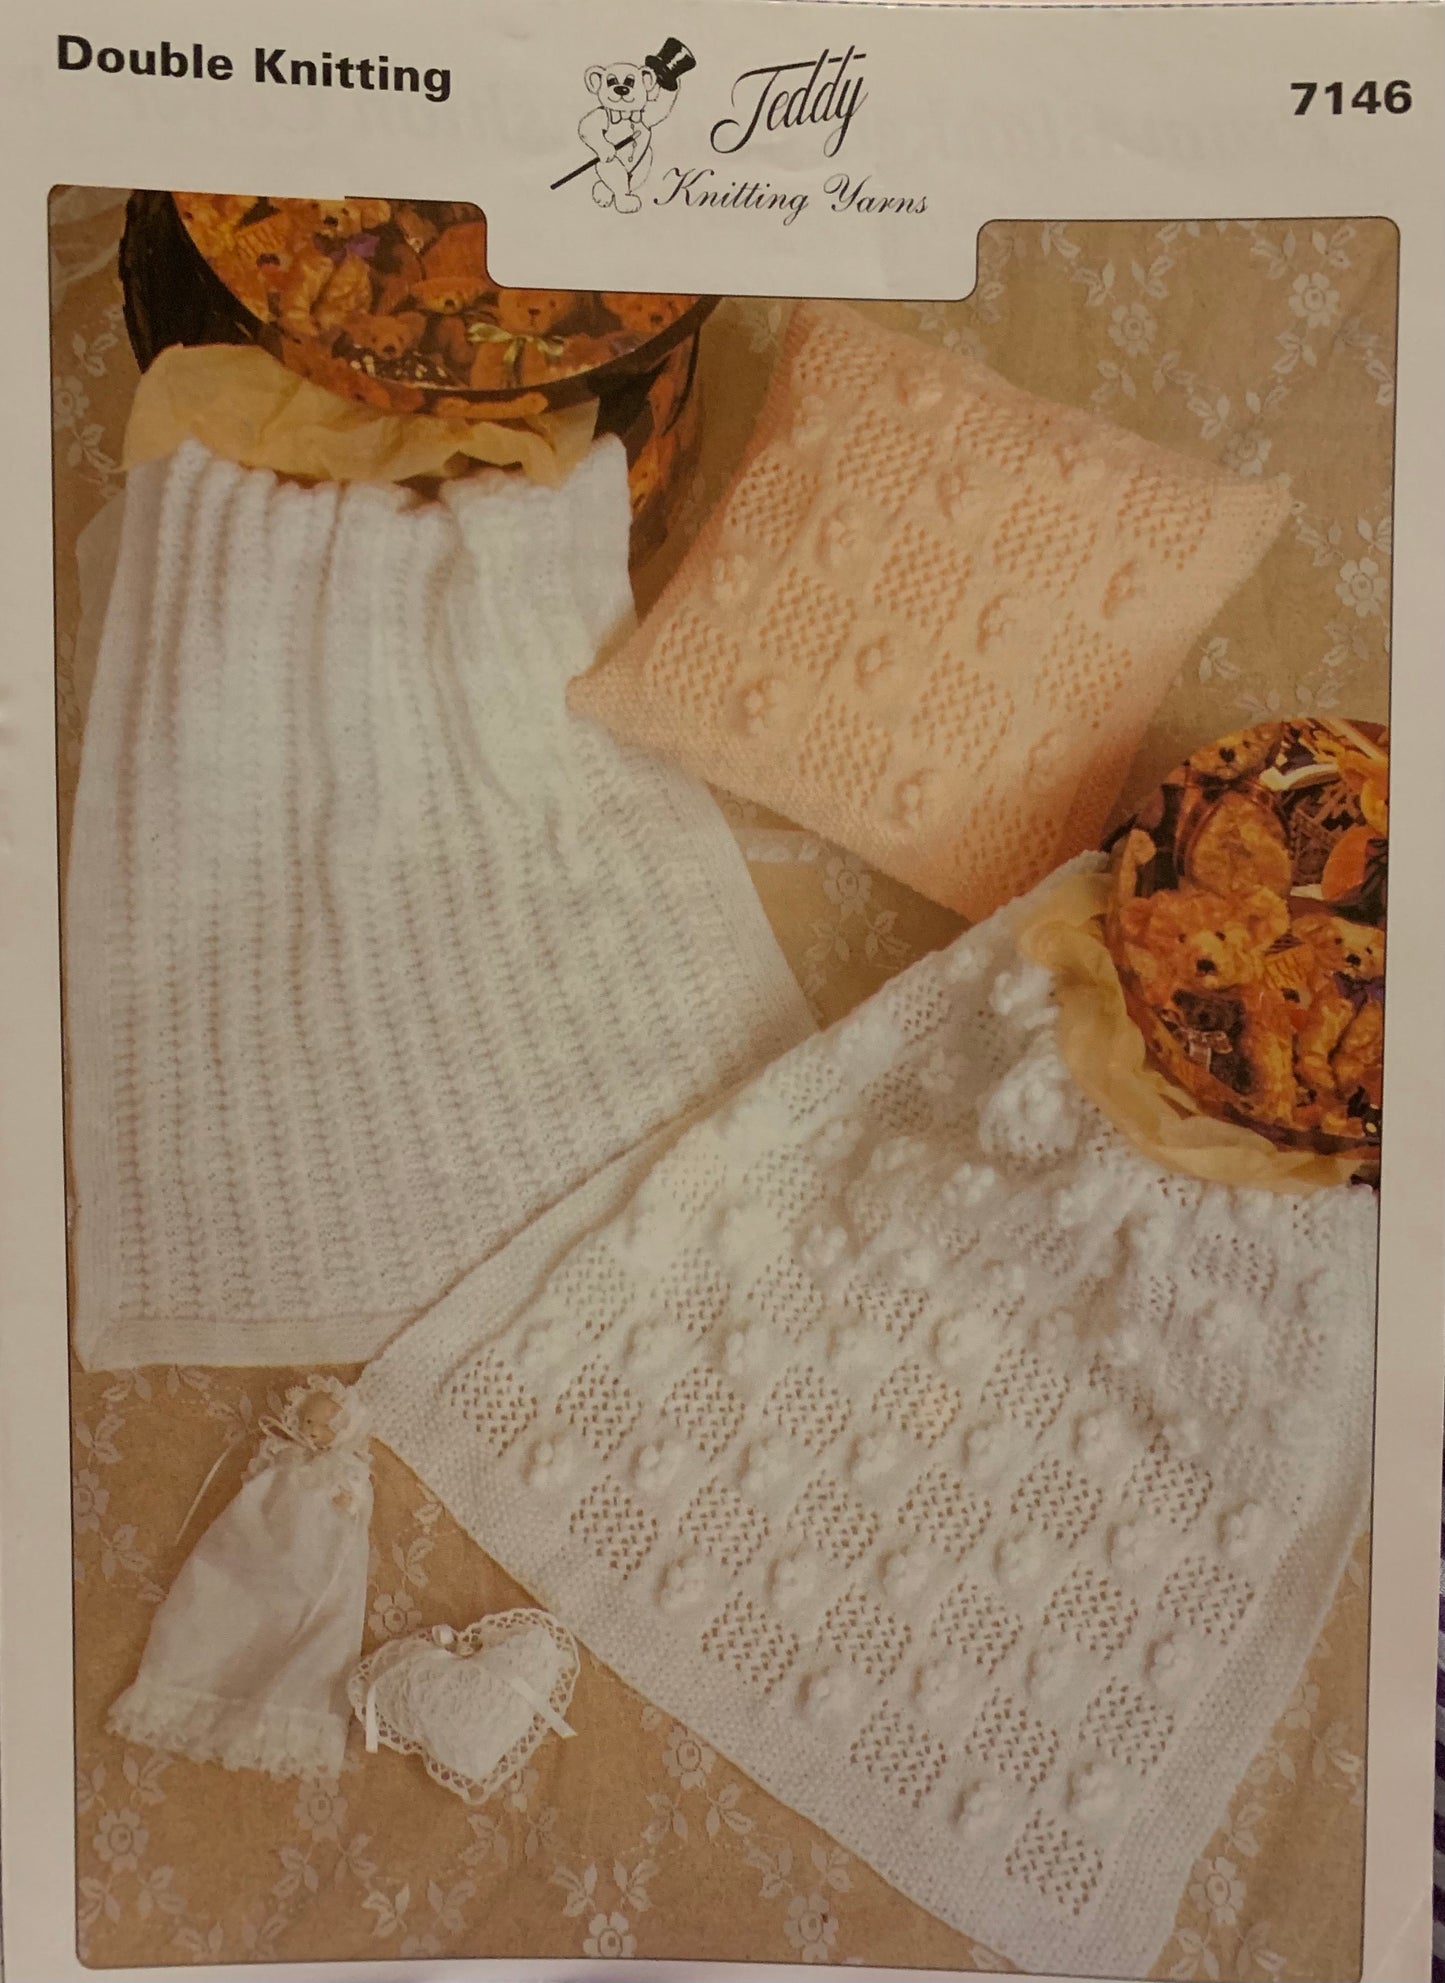 7146 Teddy double knitting blanket and cushion cover knitting pattern